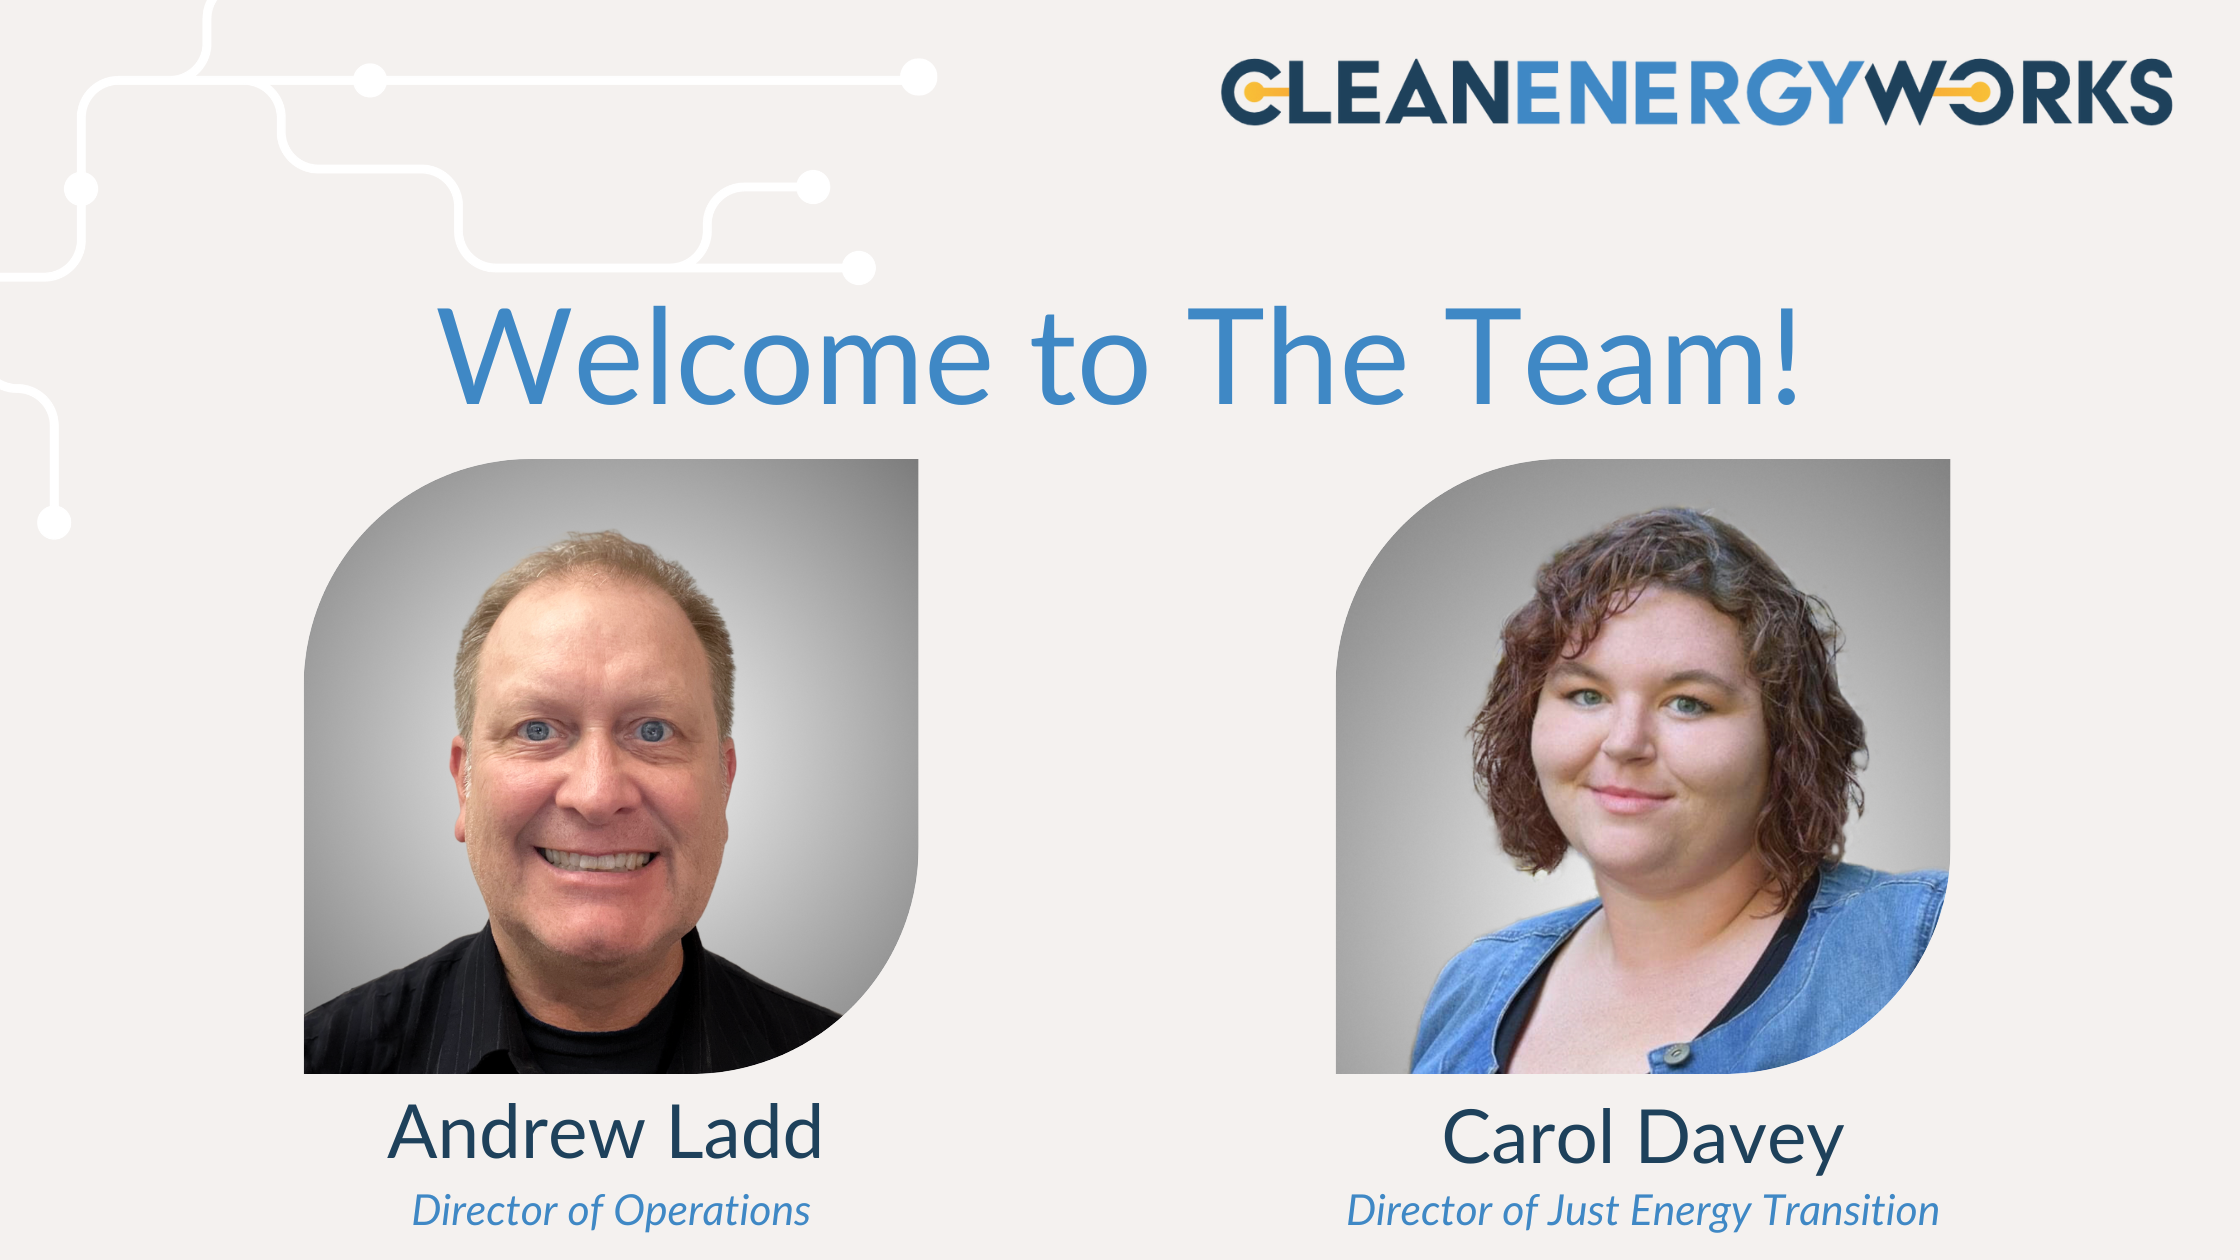 New Additions to Clean Energy Works’ Leadership Team